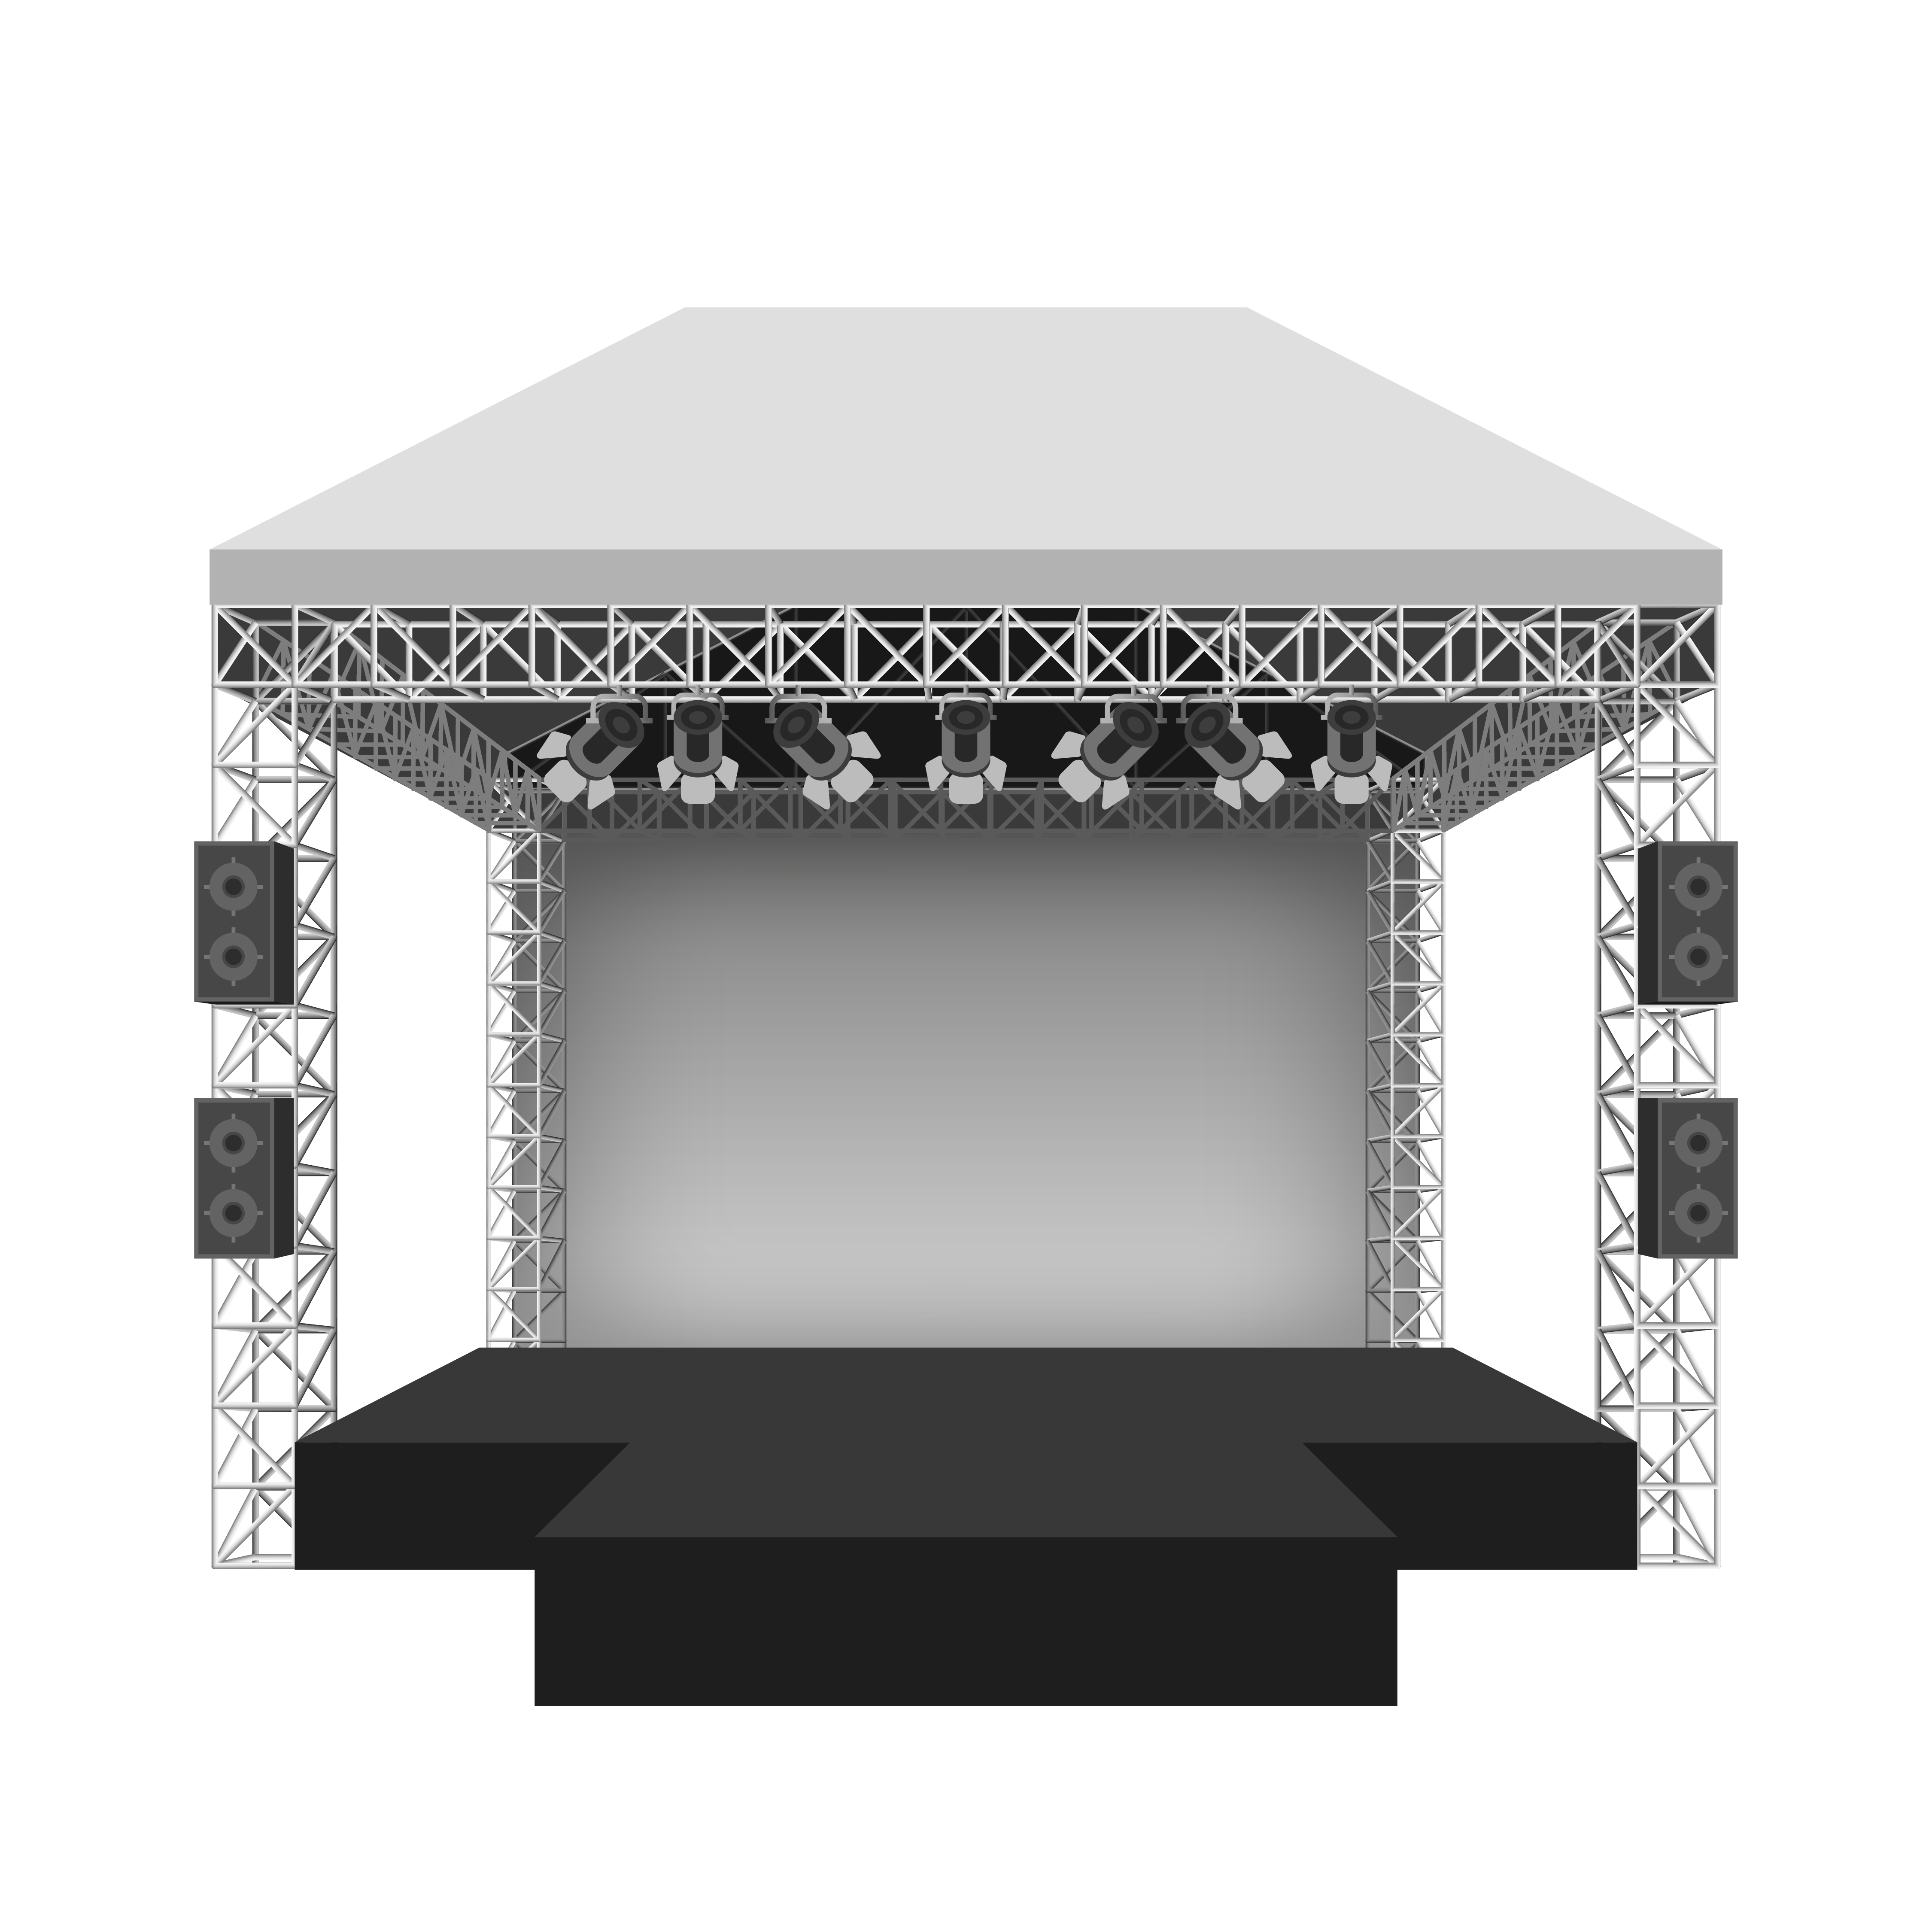 Podium concert stage. Performance show entertainment, scene and event. Vector illustration